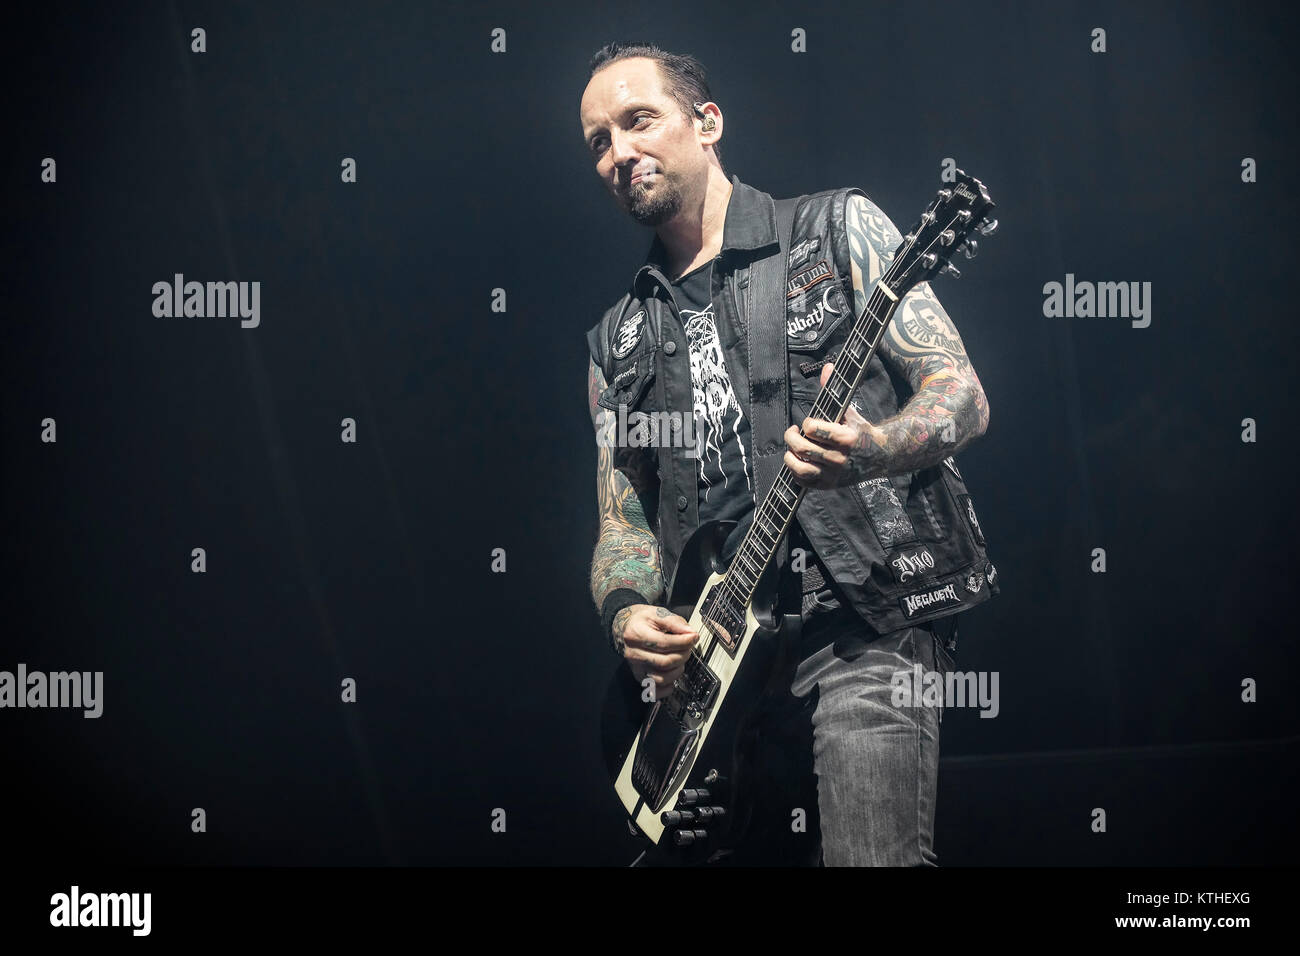 The Danish hard rock band Volbeat performs a live concert at Oslo Spektrum. Here vocalist and guitarist Michael Poulsen is seen live on stage. Norway, 26/10 2016. Stock Photo